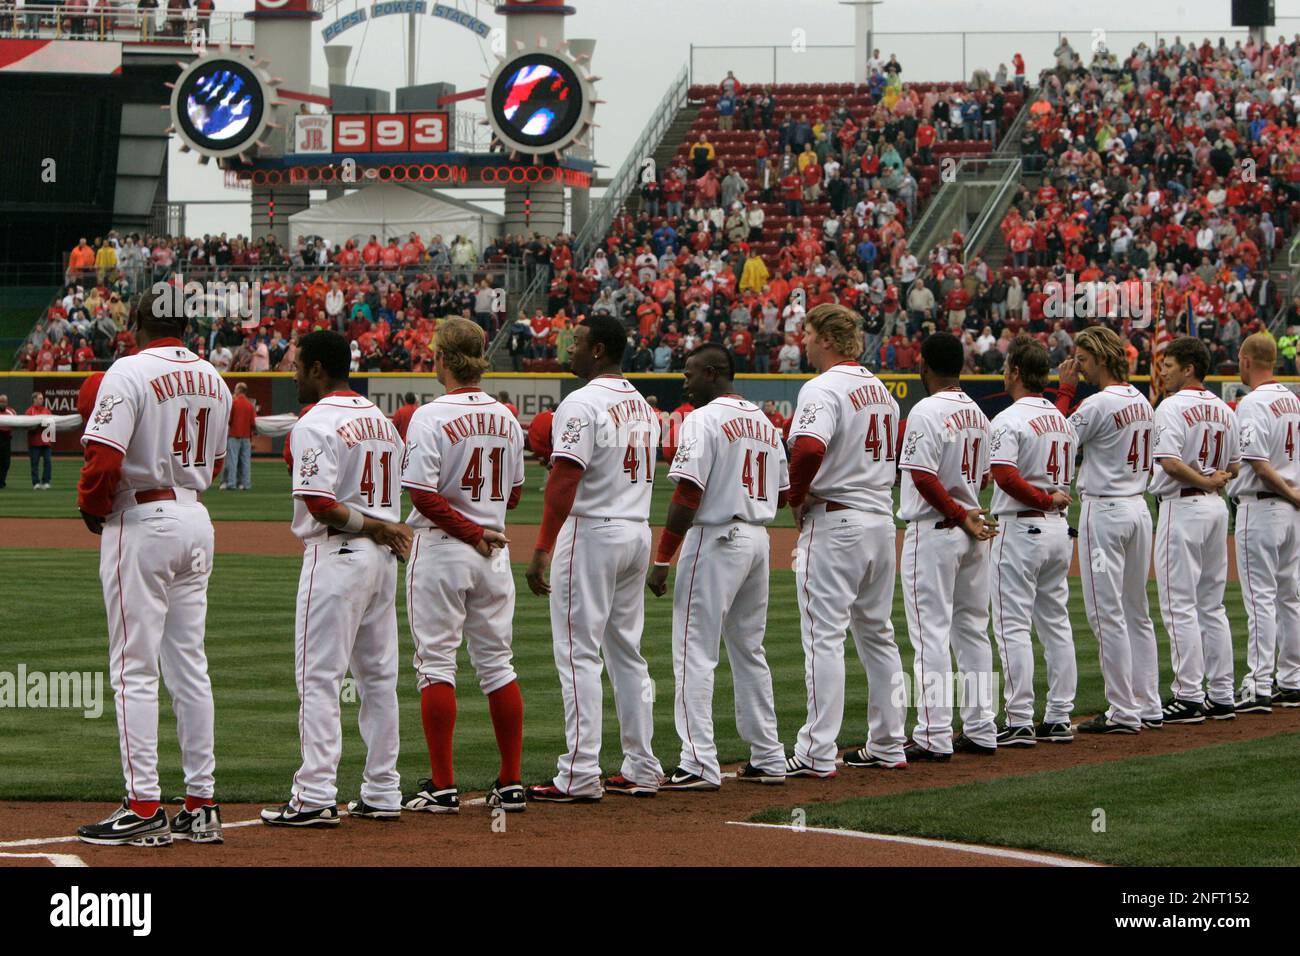 The Cincinnati Reds baseball team uniforms for the 2019 season are  displayed at Great American Ball Park, Monday, Jan. 7, 2019, in Cincinnati.  The Reds will play games in 15 sets of